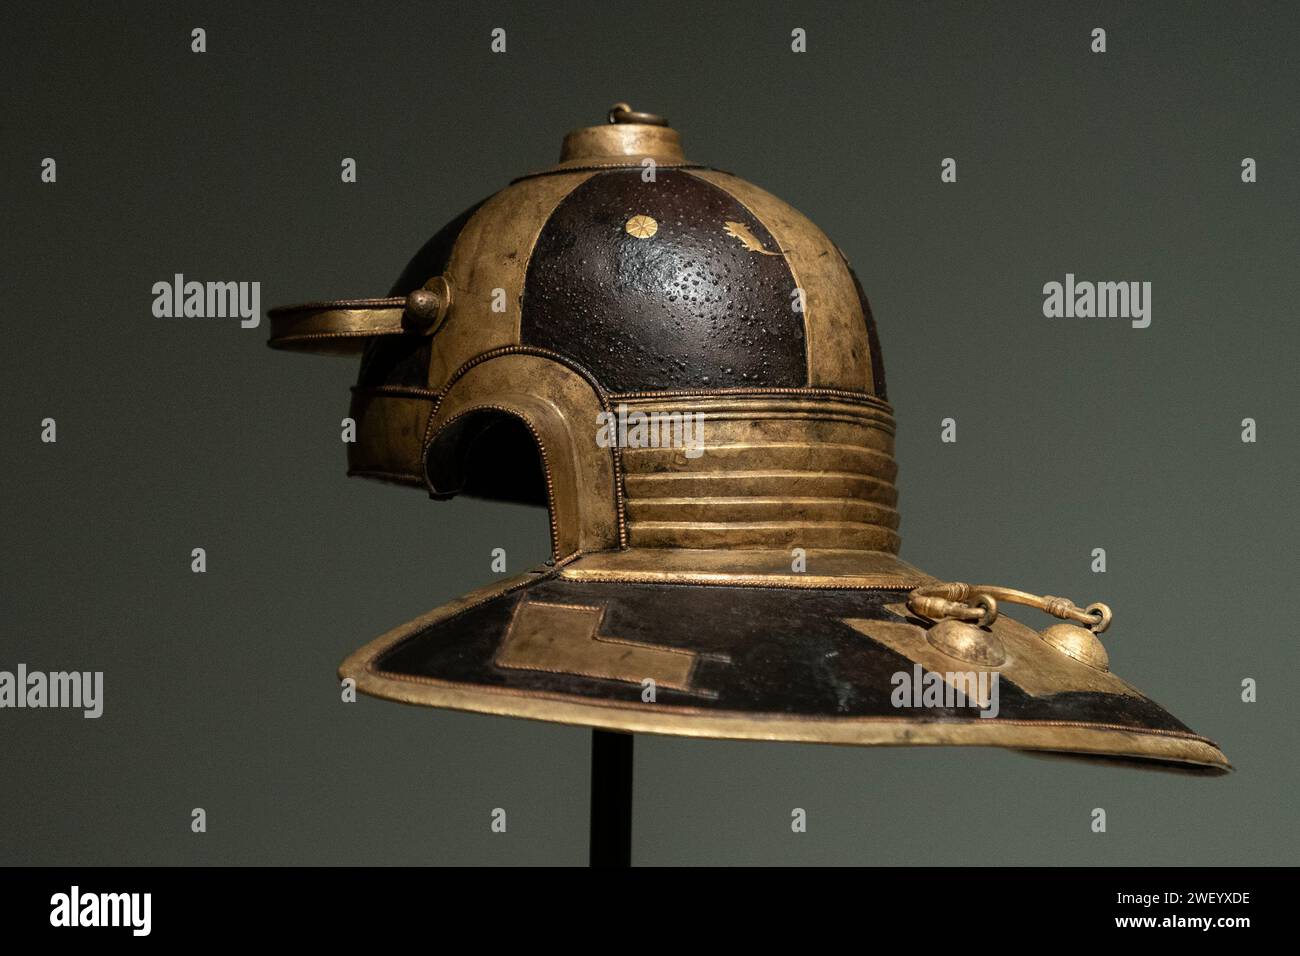 New York, USA. 26th Jan, 2024. Roman Iron, Brass and Copper Helmet from 2nd century A.D. from Mougins Museum of Classical Art Collection seen during press preview ahead of auction at Christie's in New York on January 26, 2024. Helmet featured a small mouse on the top and punched inscription naming the helmet's owner, IVLI MANSVETI, probably to be read as Julius Mansuetus. (Photo by Lev Radin/Sipa USA) Credit: Sipa USA/Alamy Live News Stock Photo